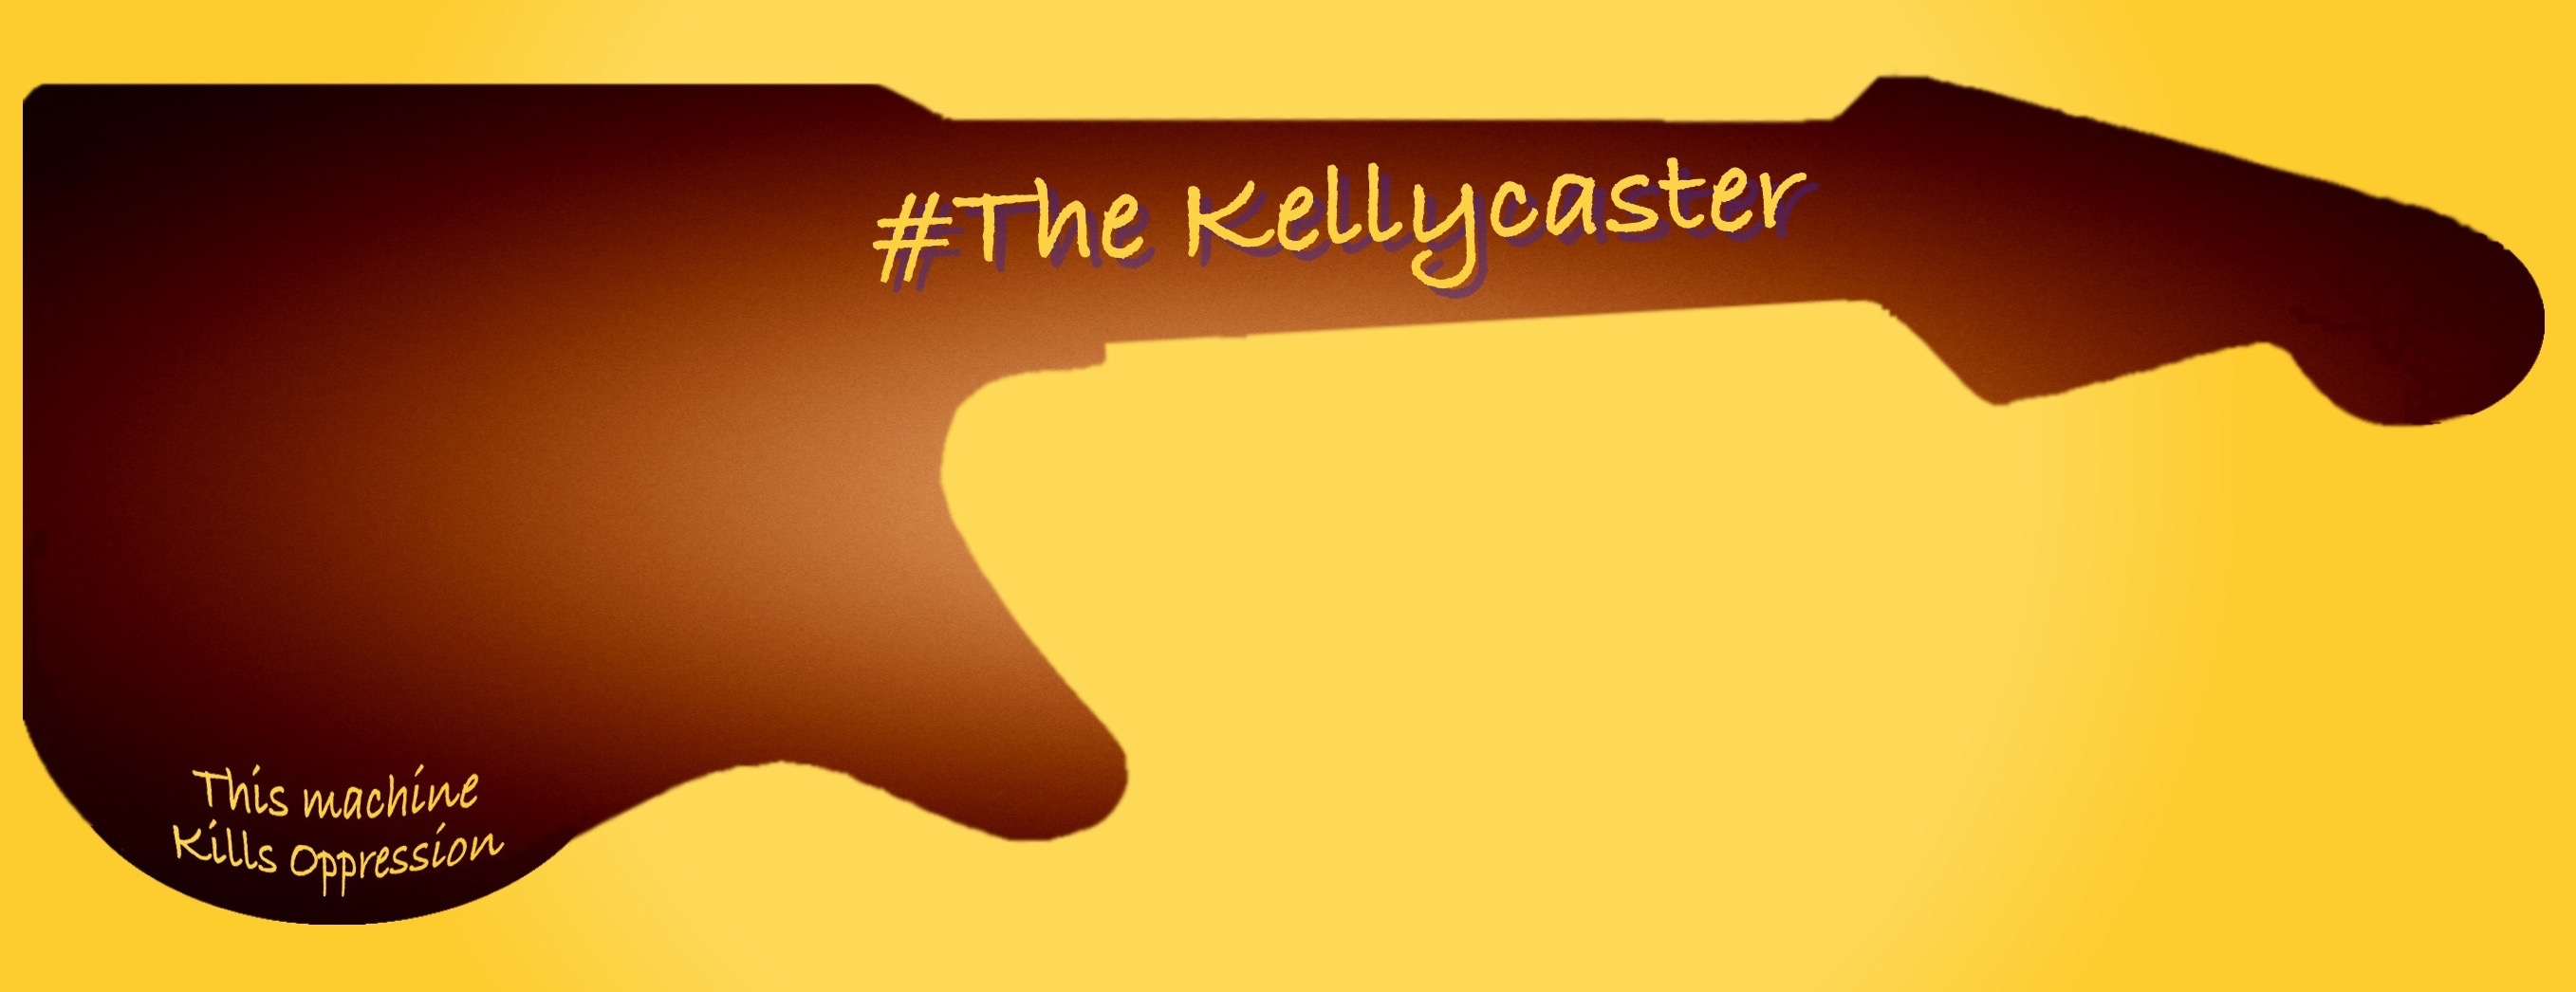 Silhouette of The Kellycaster body shape with The Kellycaster logo on neck and inscription "This Machine Kills Oppression" on body of guitar..